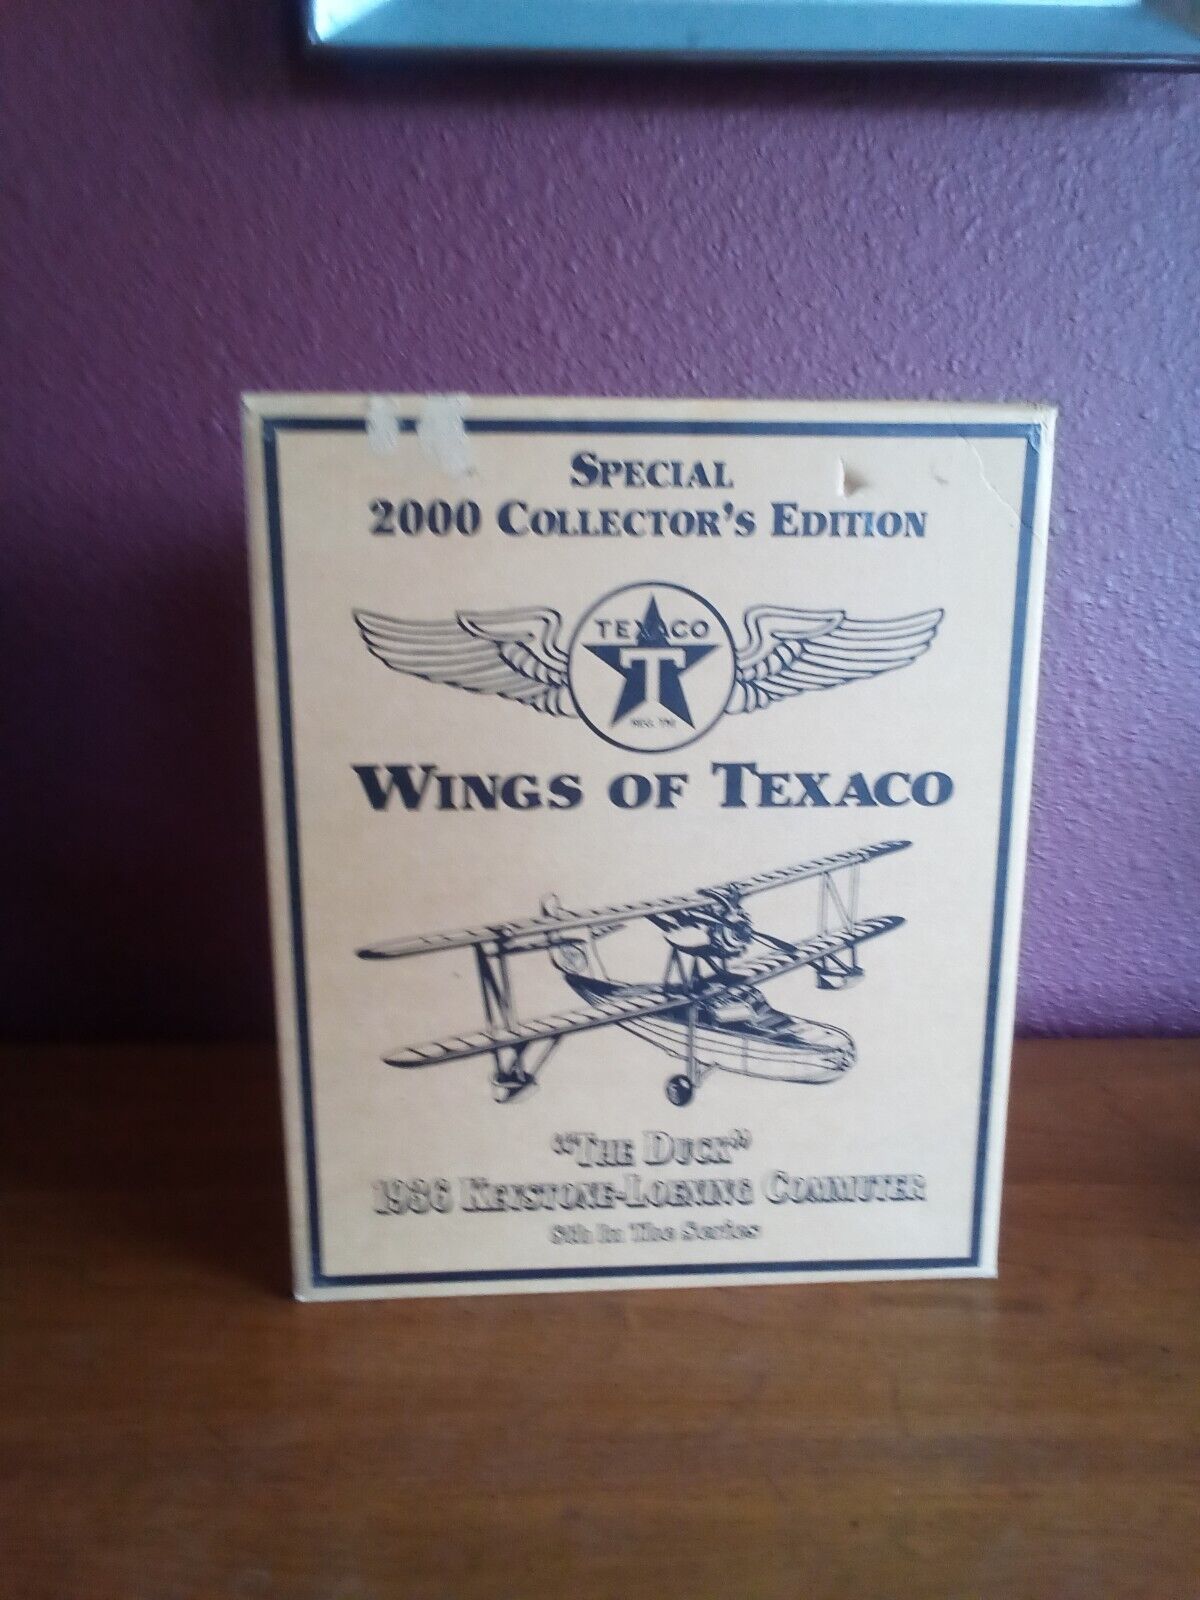 Wings of Texaco Special 2000 Collectors Edition 1936 Keystone-Loening Commuter